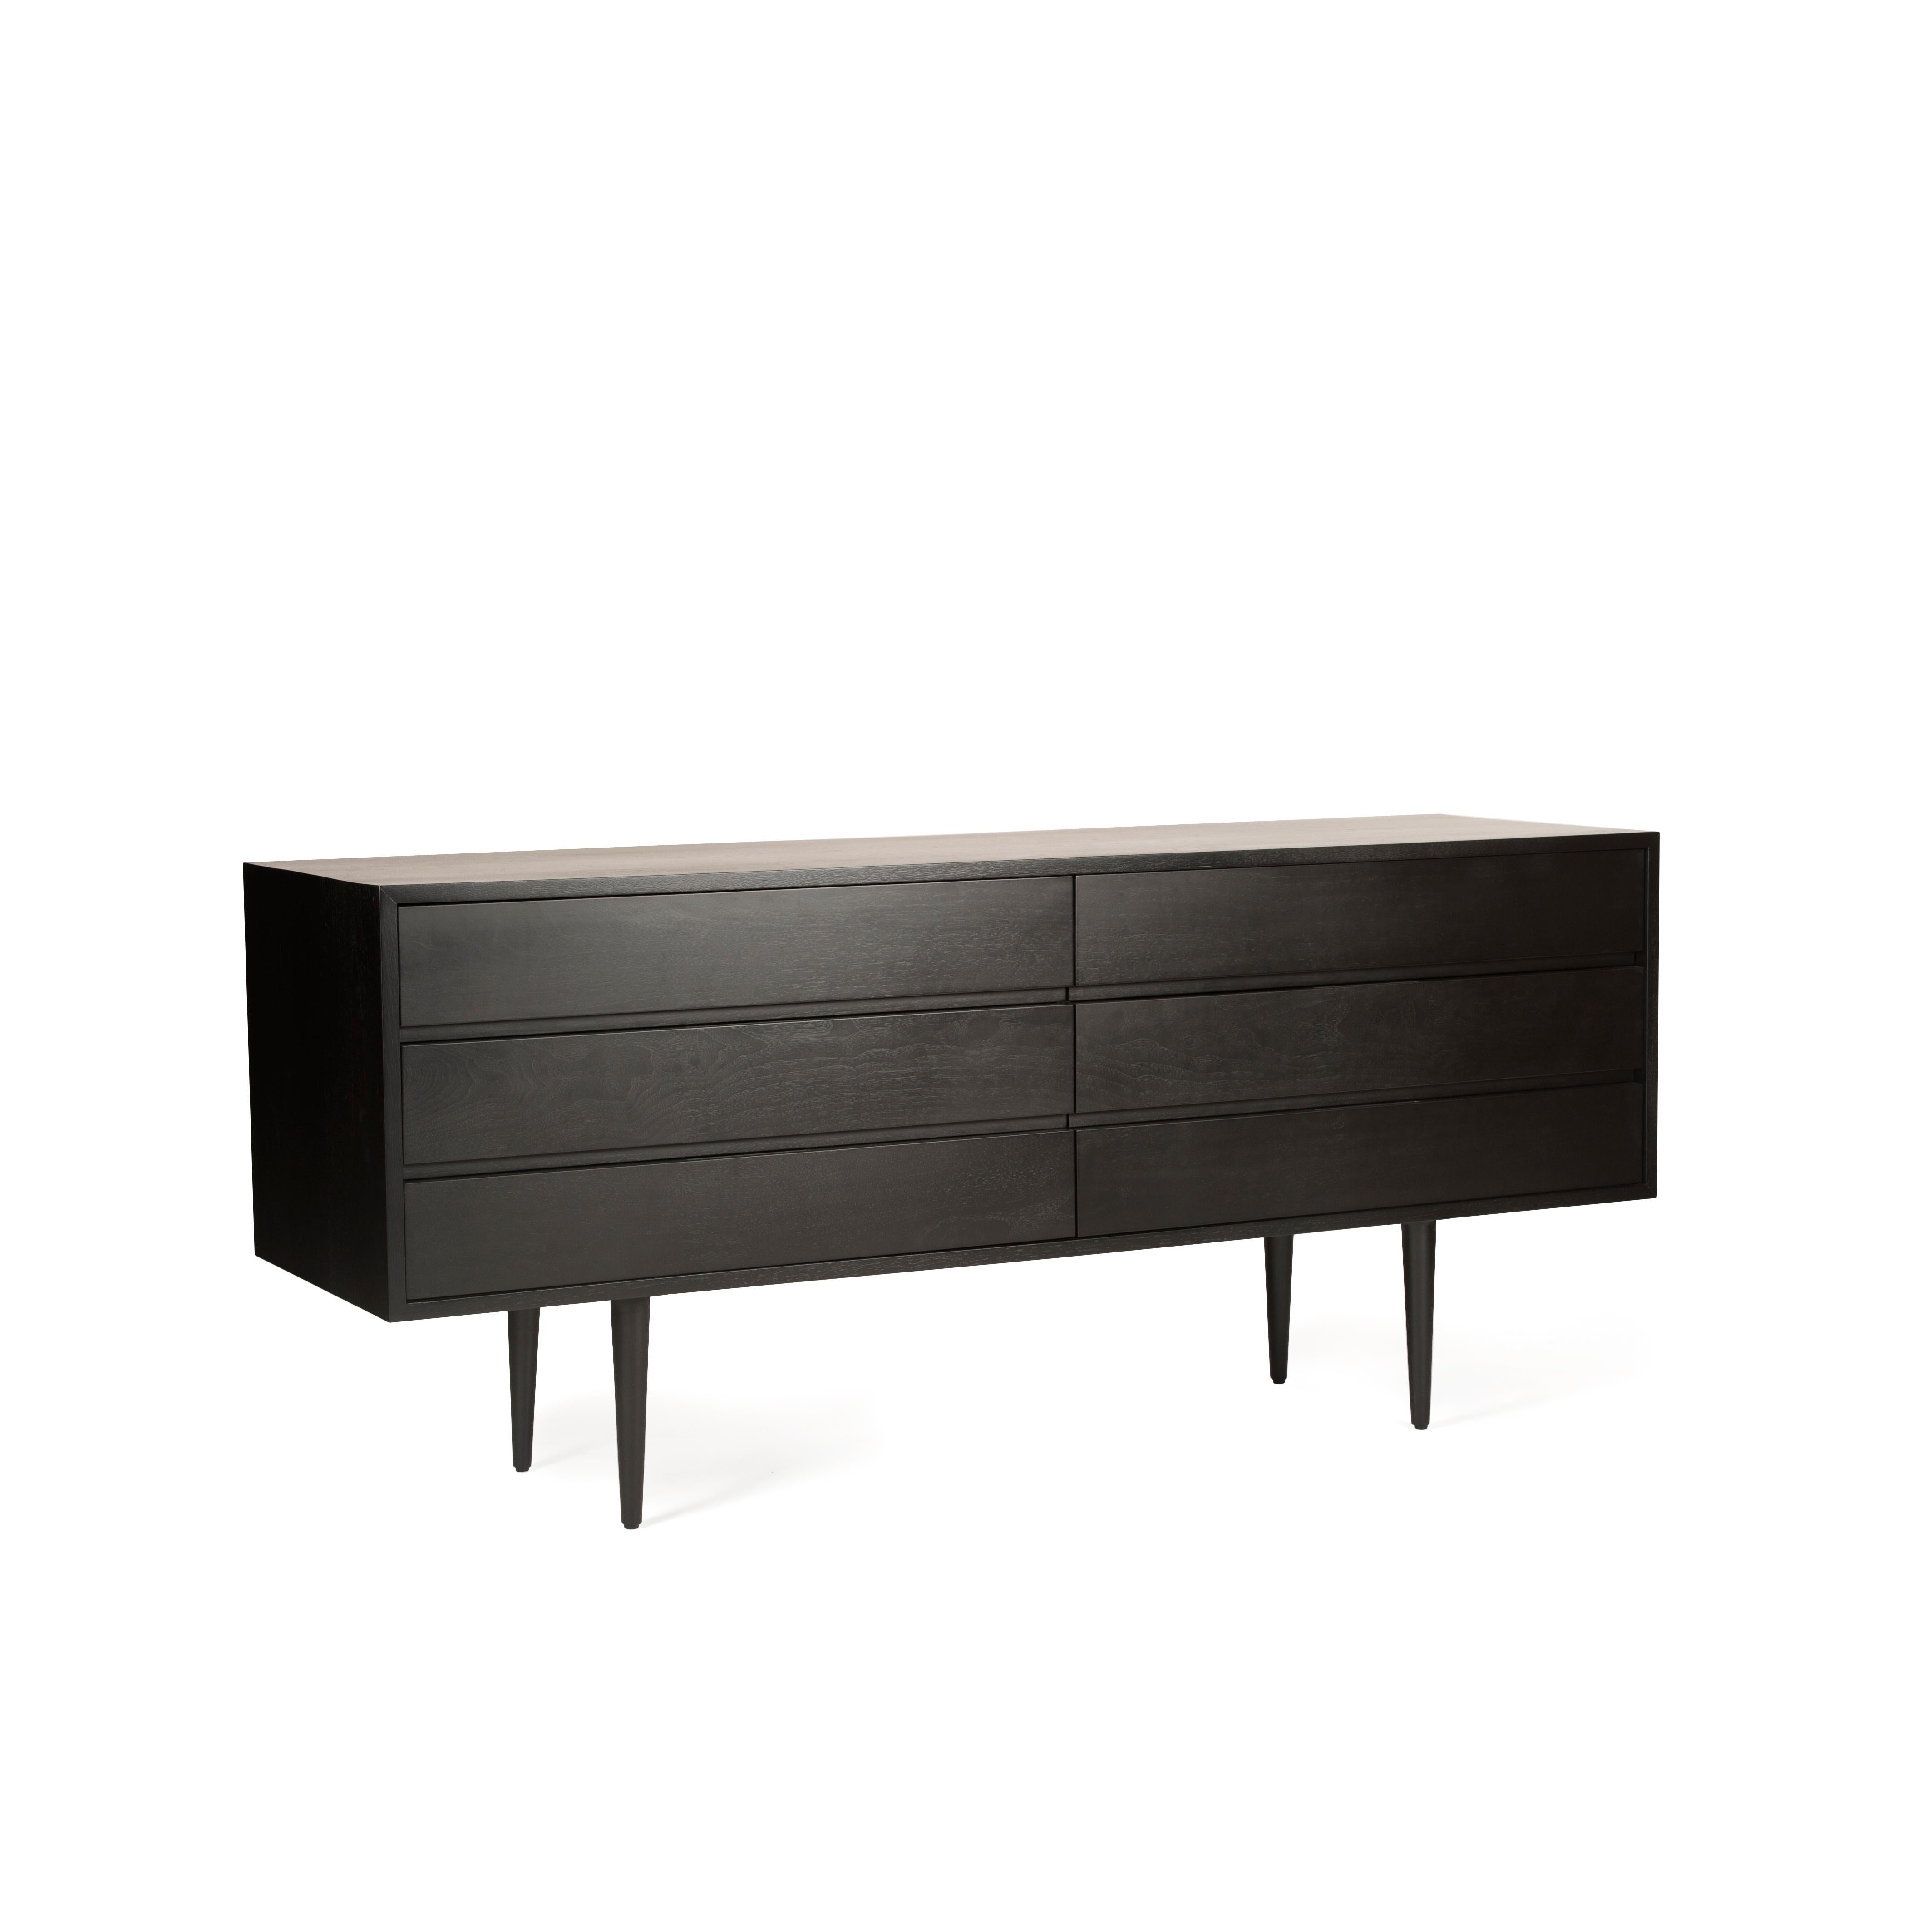 Originally designed by Mel Smilow in 1950 and officially reintroduced by his daughter Judy Smilow in 2017, the solid wood Six Drawer Dresser with leather-lined drawers has a beautifully finished front and back in ebonized walnut. The focal point of